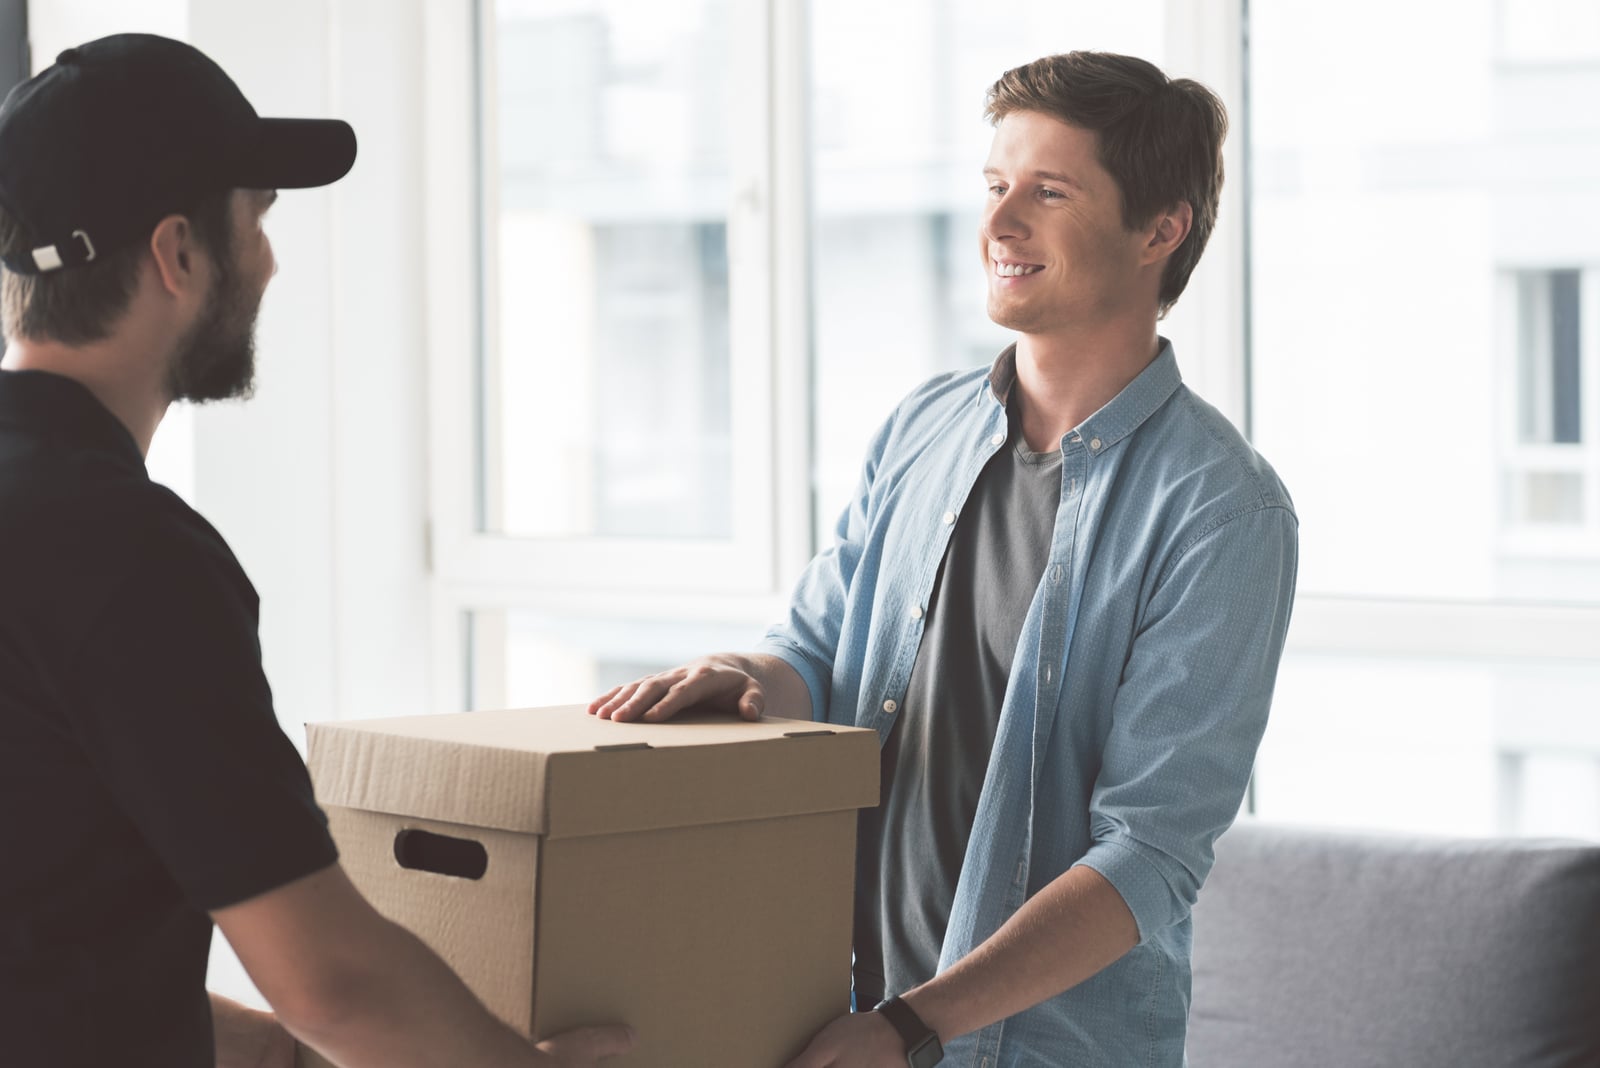 the delivery man hands the package to the smiling man